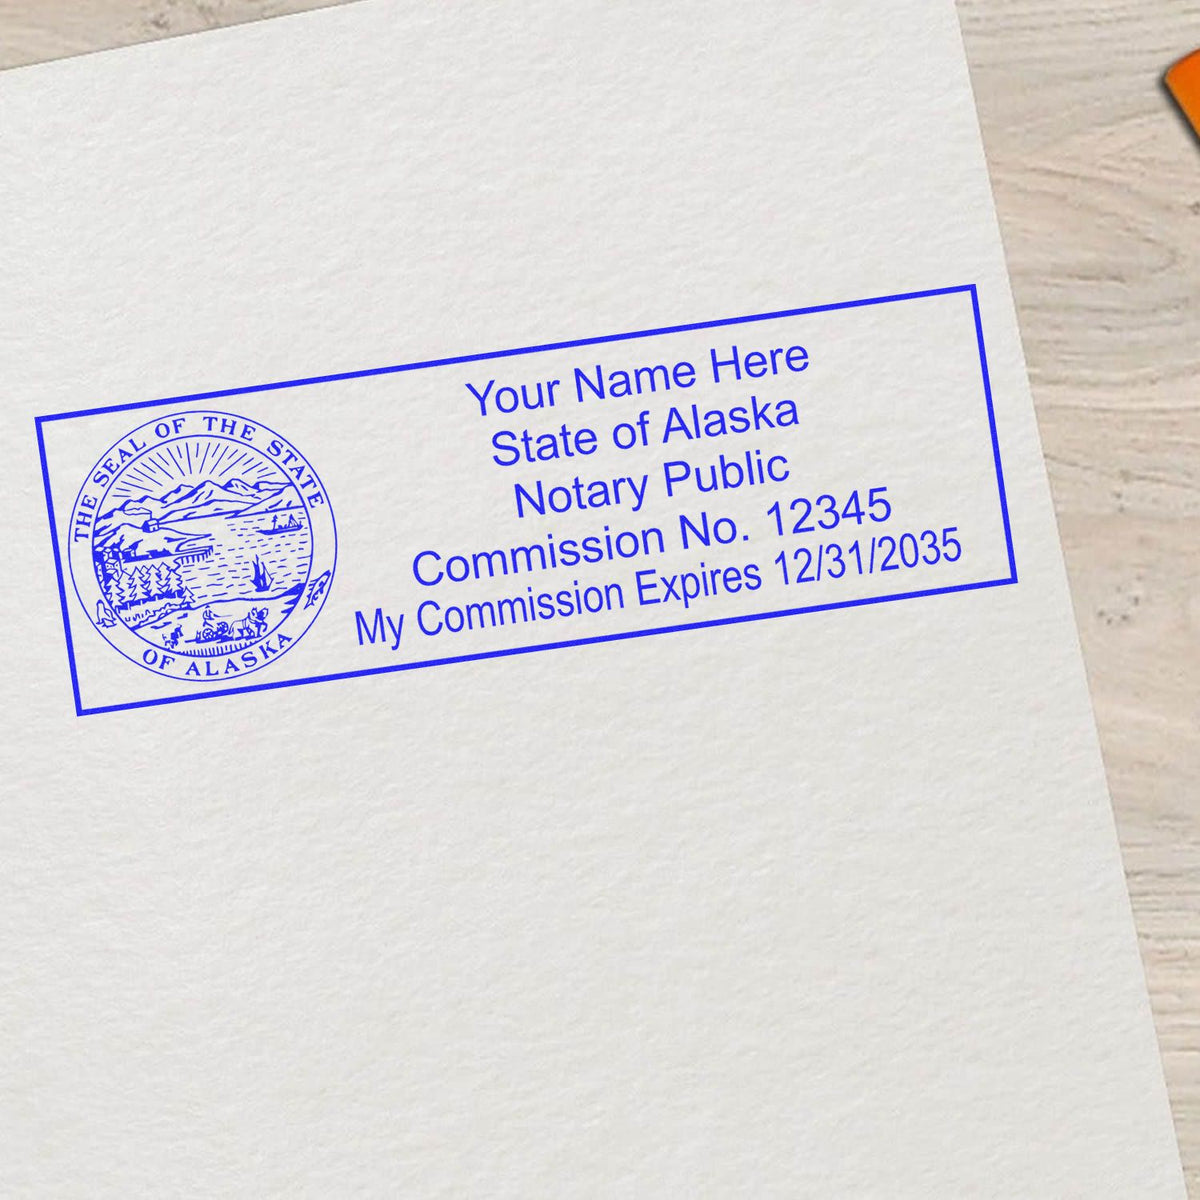 A photograph of the Heavy-Duty Alaska Rectangular Notary Stamp stamp impression reveals a vivid, professional image of the on paper.